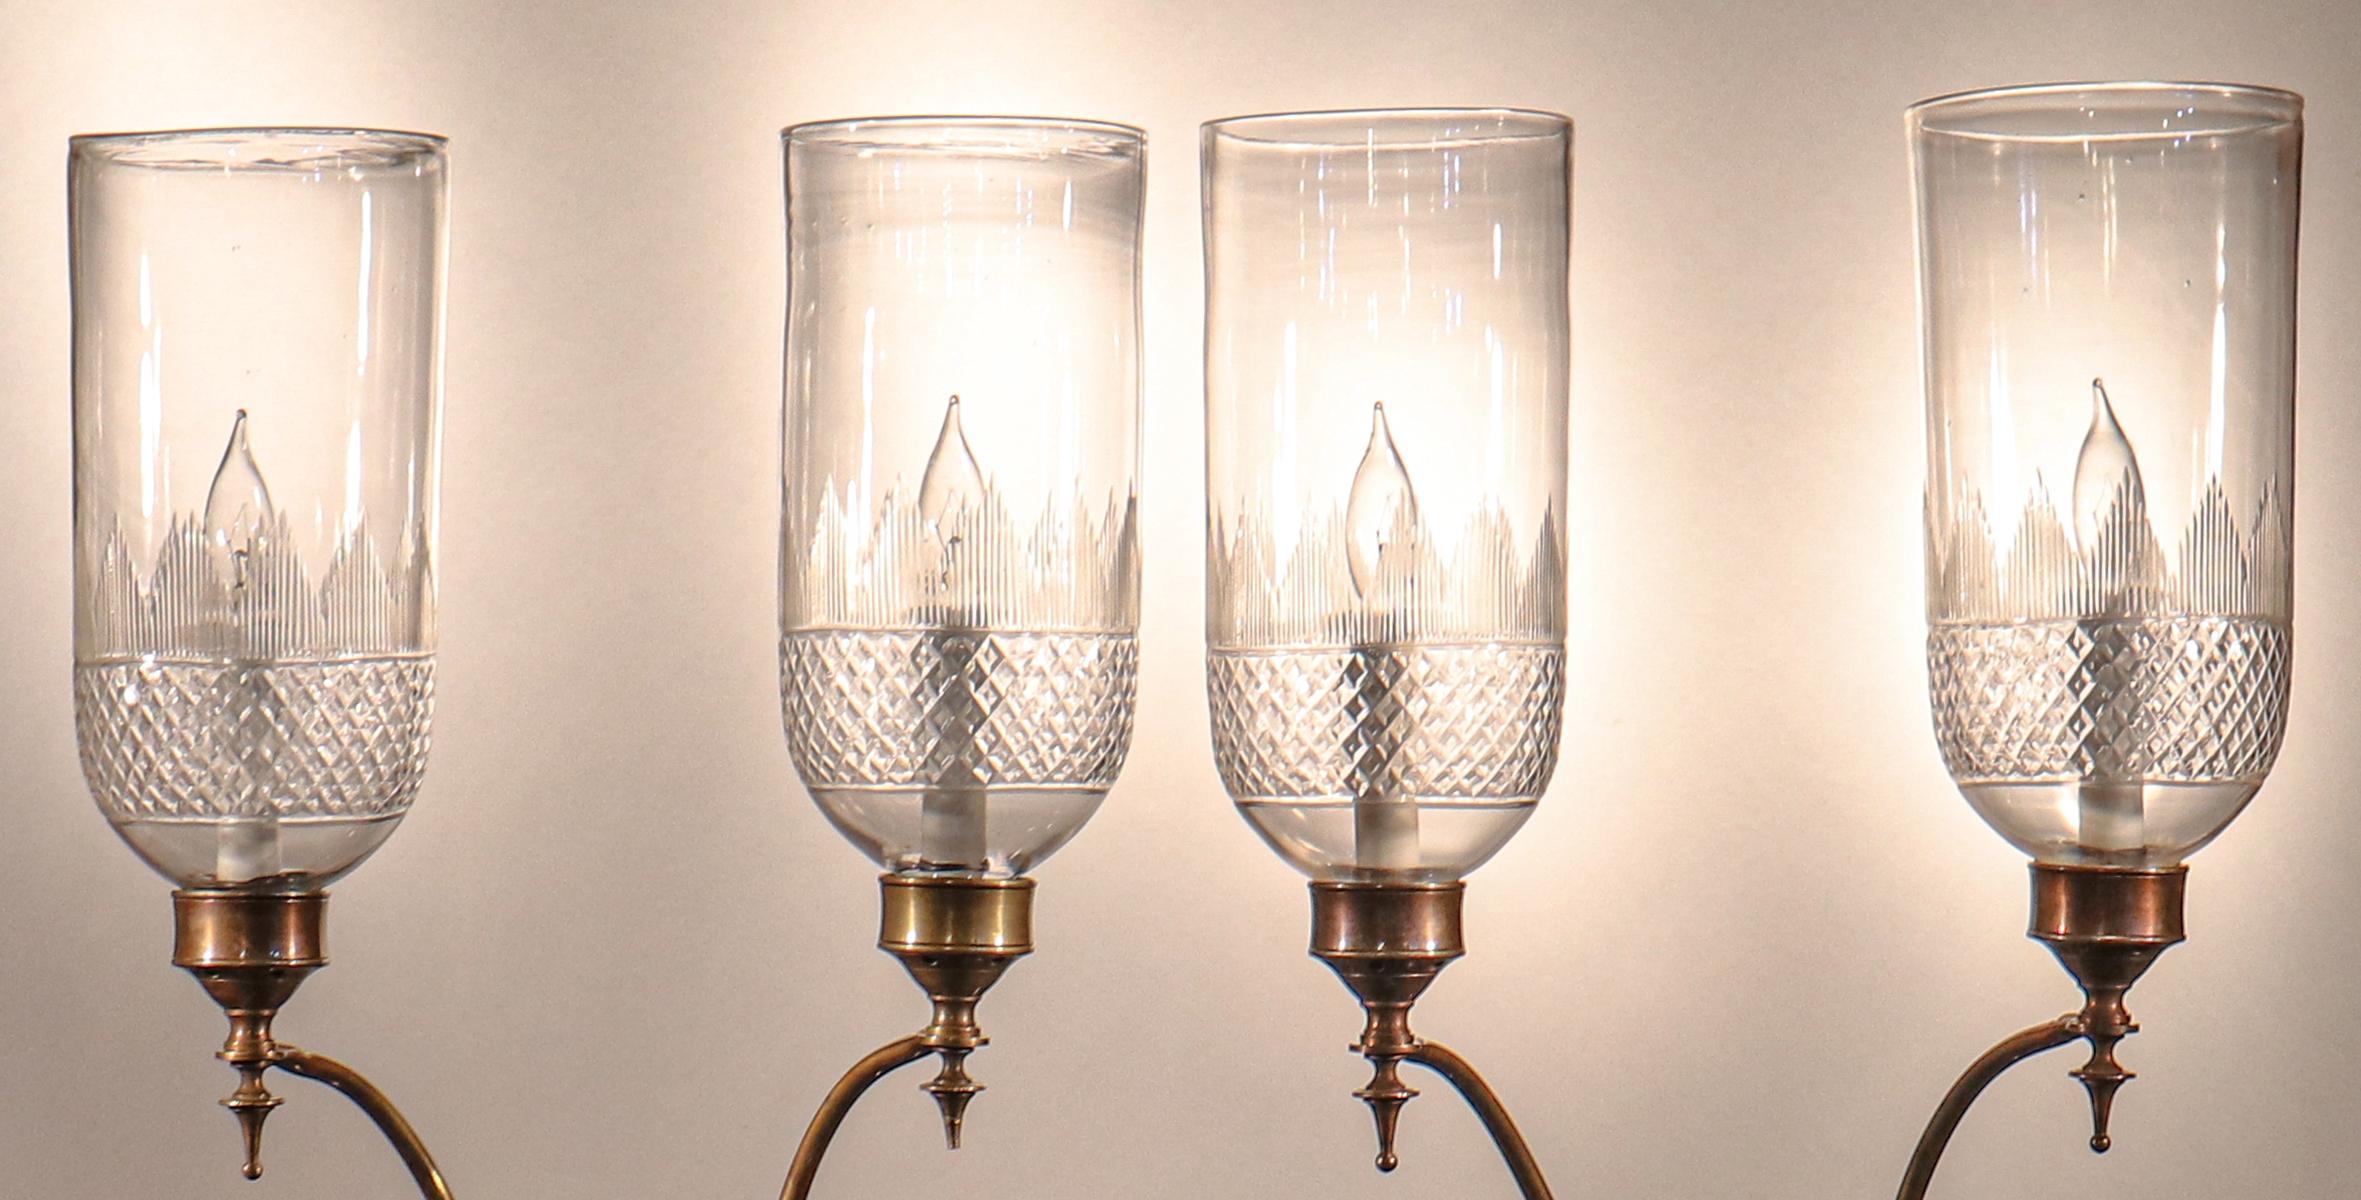 High Victorian Pair of 19th Century Hurricane Shade Double-Arm Wall Sconces